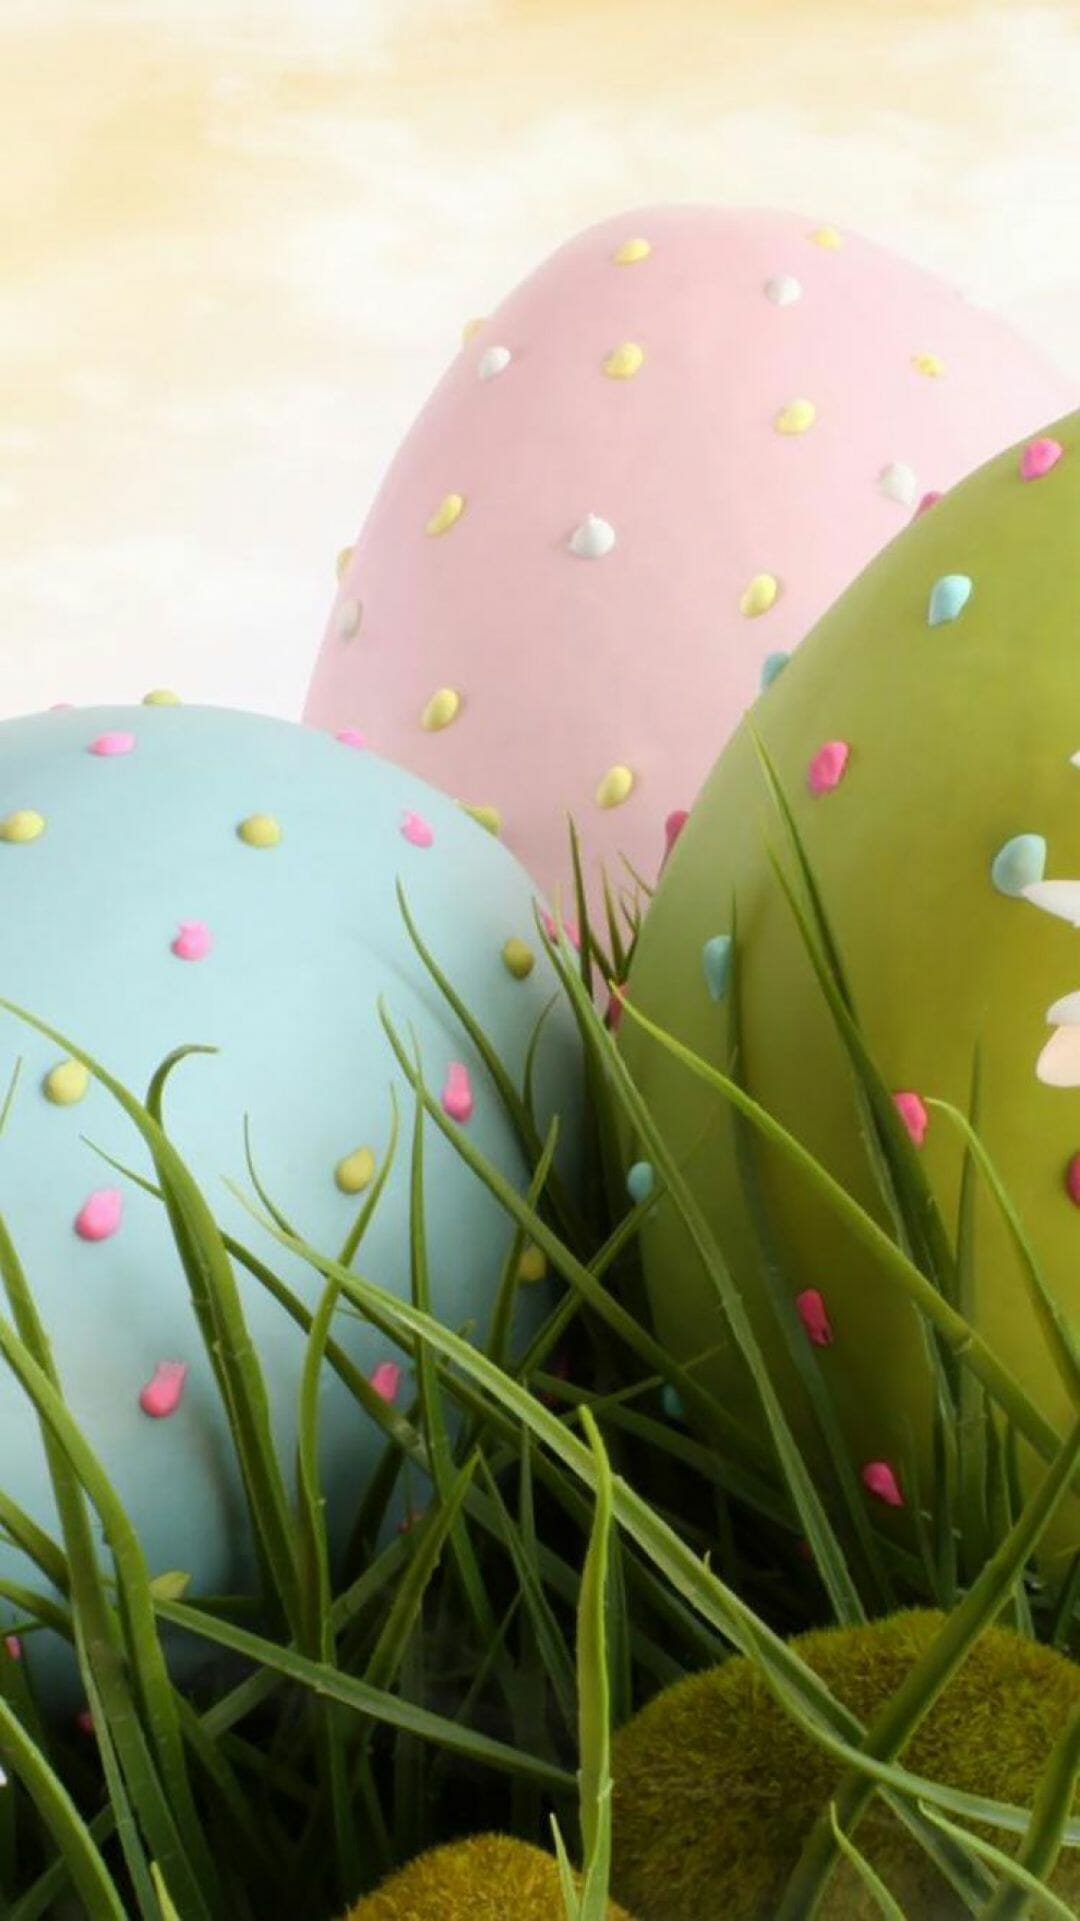 Easter Iphone Wallpapers